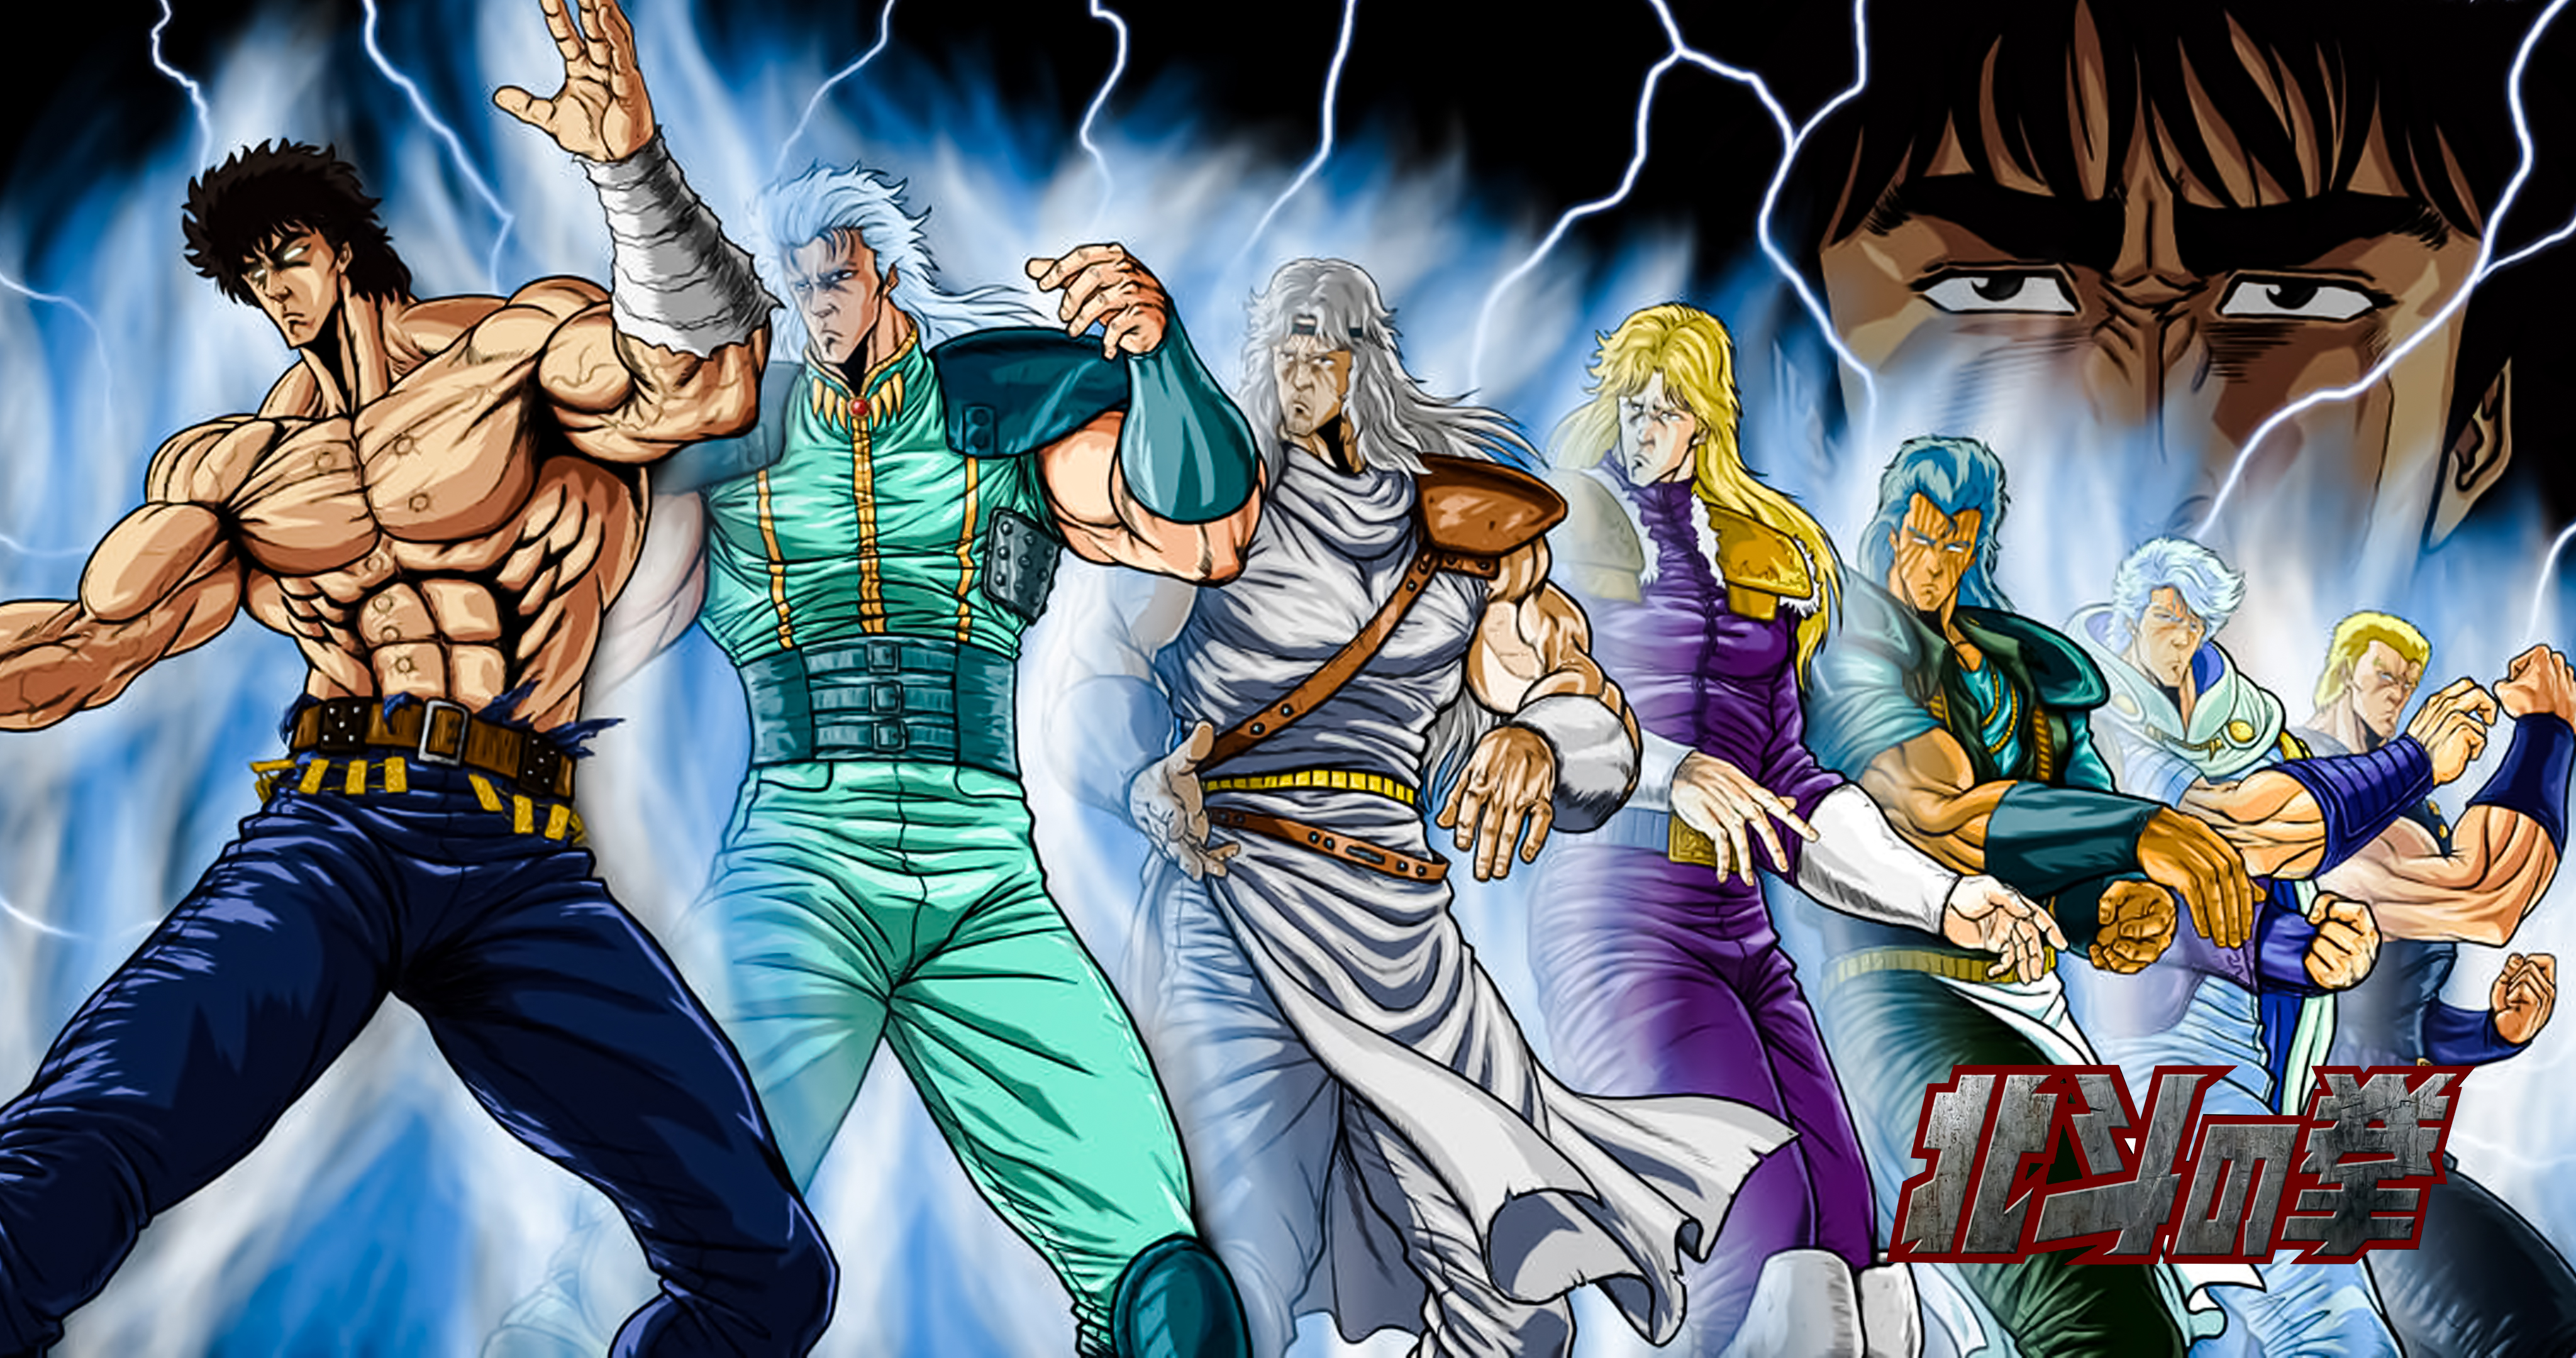 Anime 4096x2160 Fist Of The North Star Hokuto no Ken anime men Japanese characters Japanese